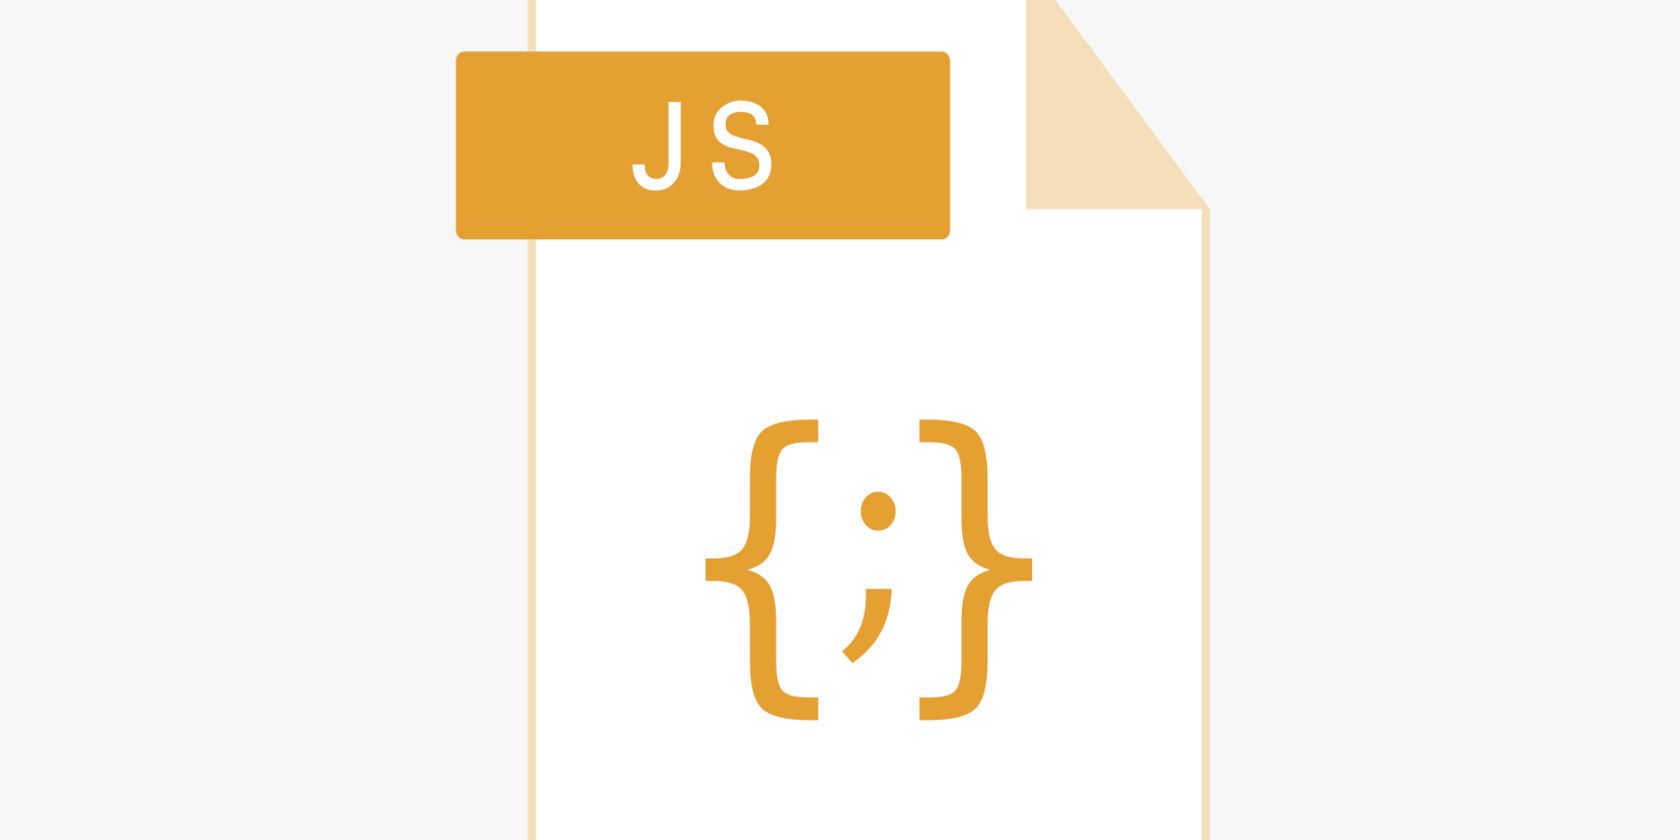 A file icon containing the word “JS” alongside a semi-colon inside curly brackets 